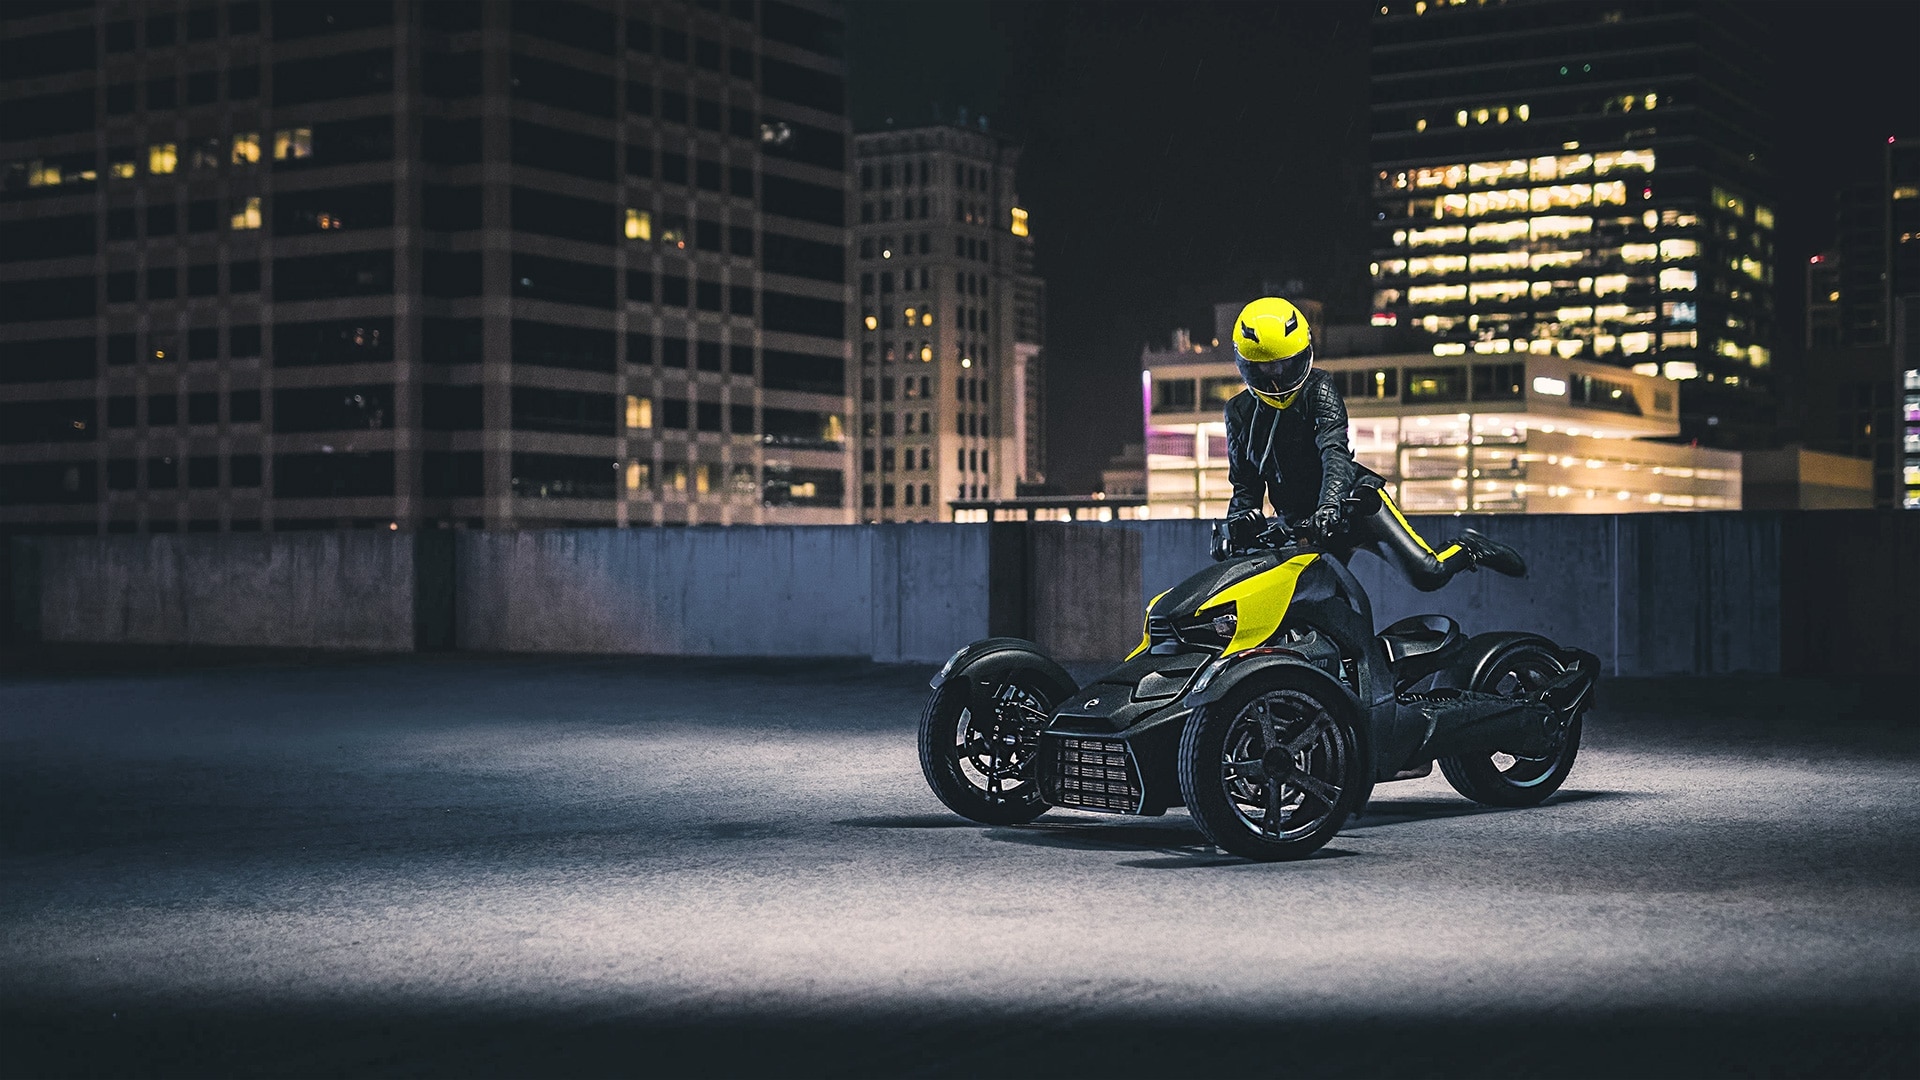 WHAT DO YOU WEAR WHEN RIDING A CAN-AM 3-WHEEL MOTORCYCLE?